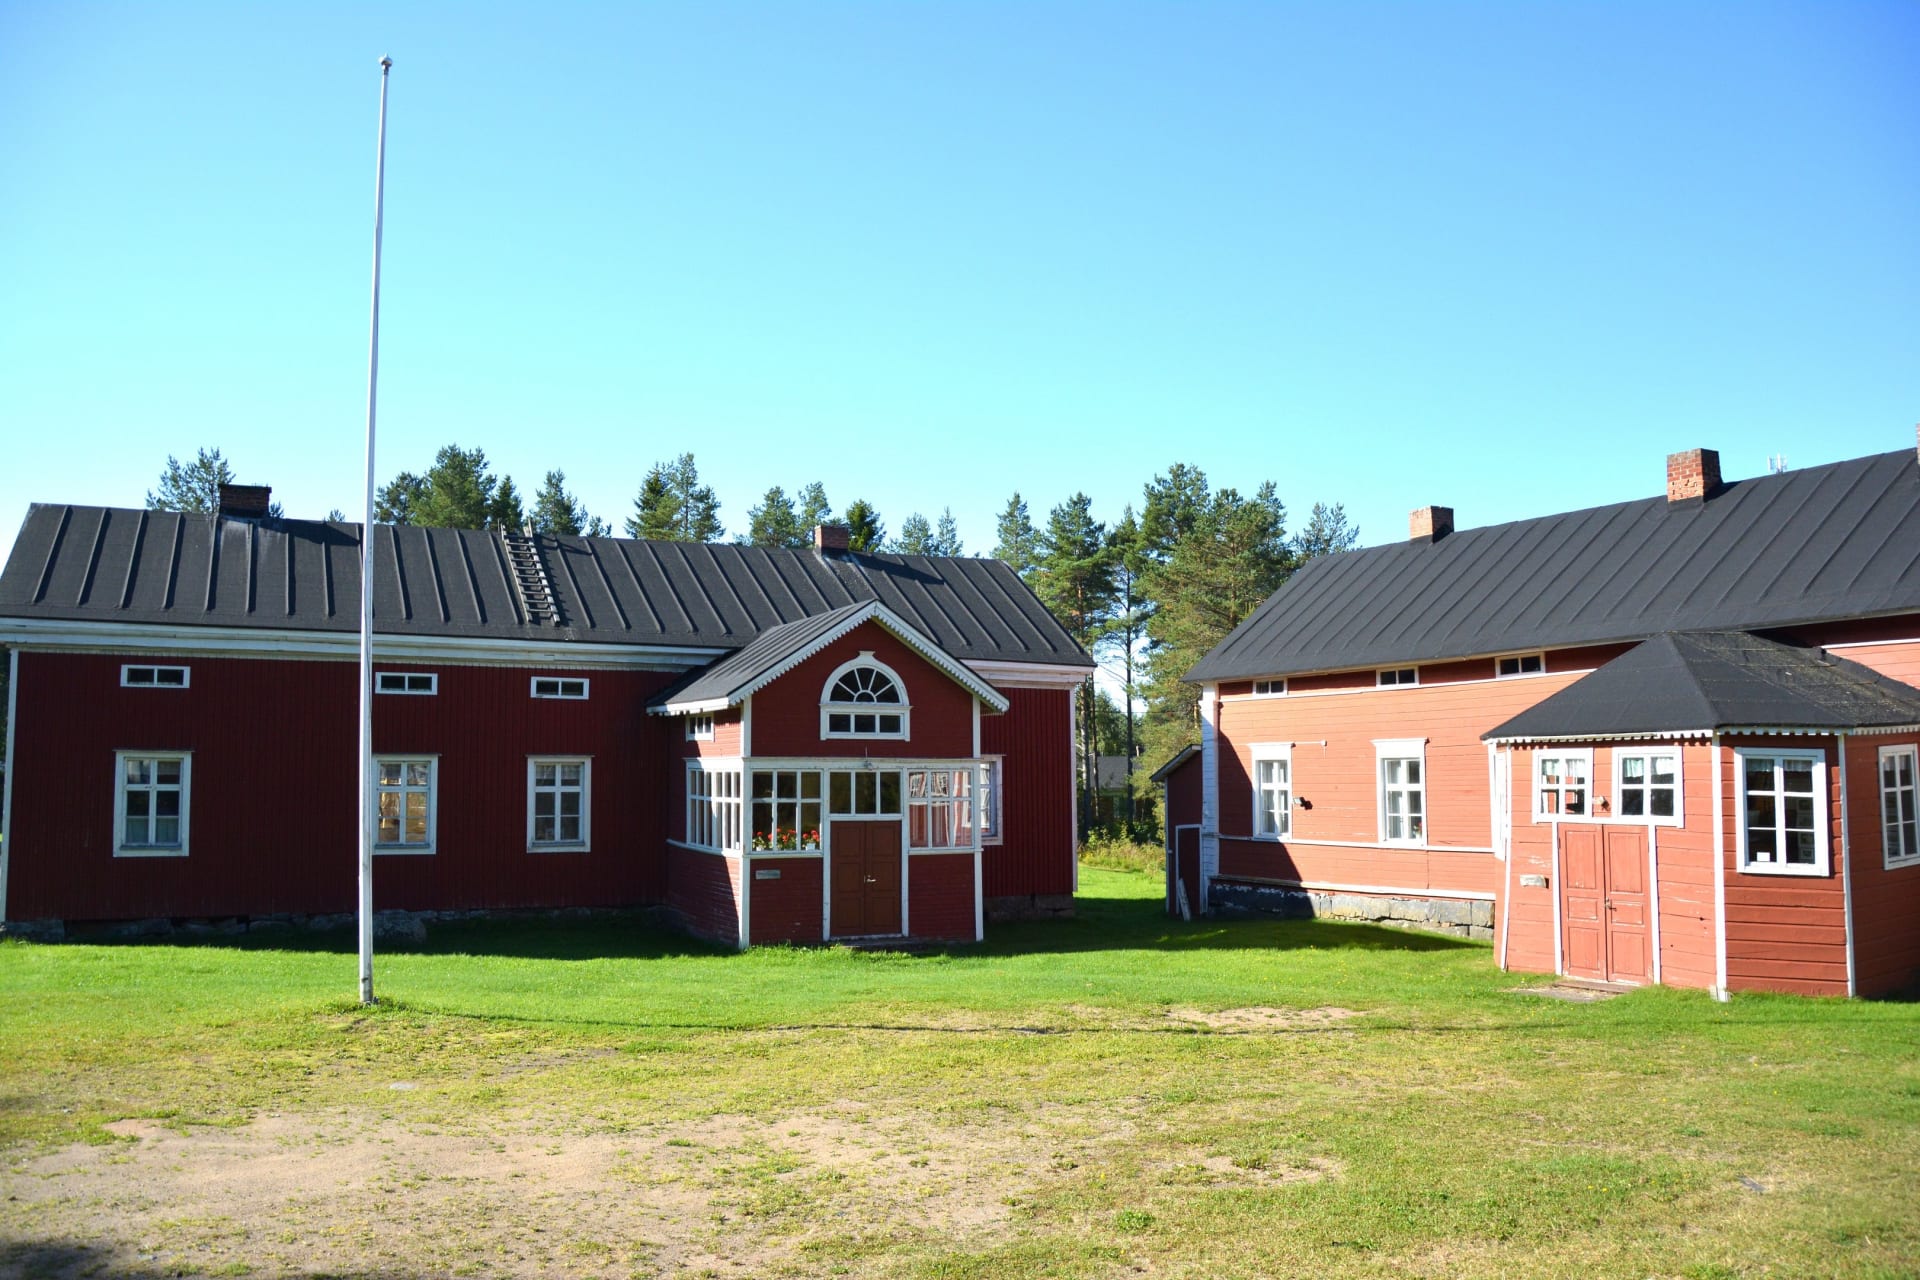 Court yard of the Annala Local History Museum with traditional red wooden houses